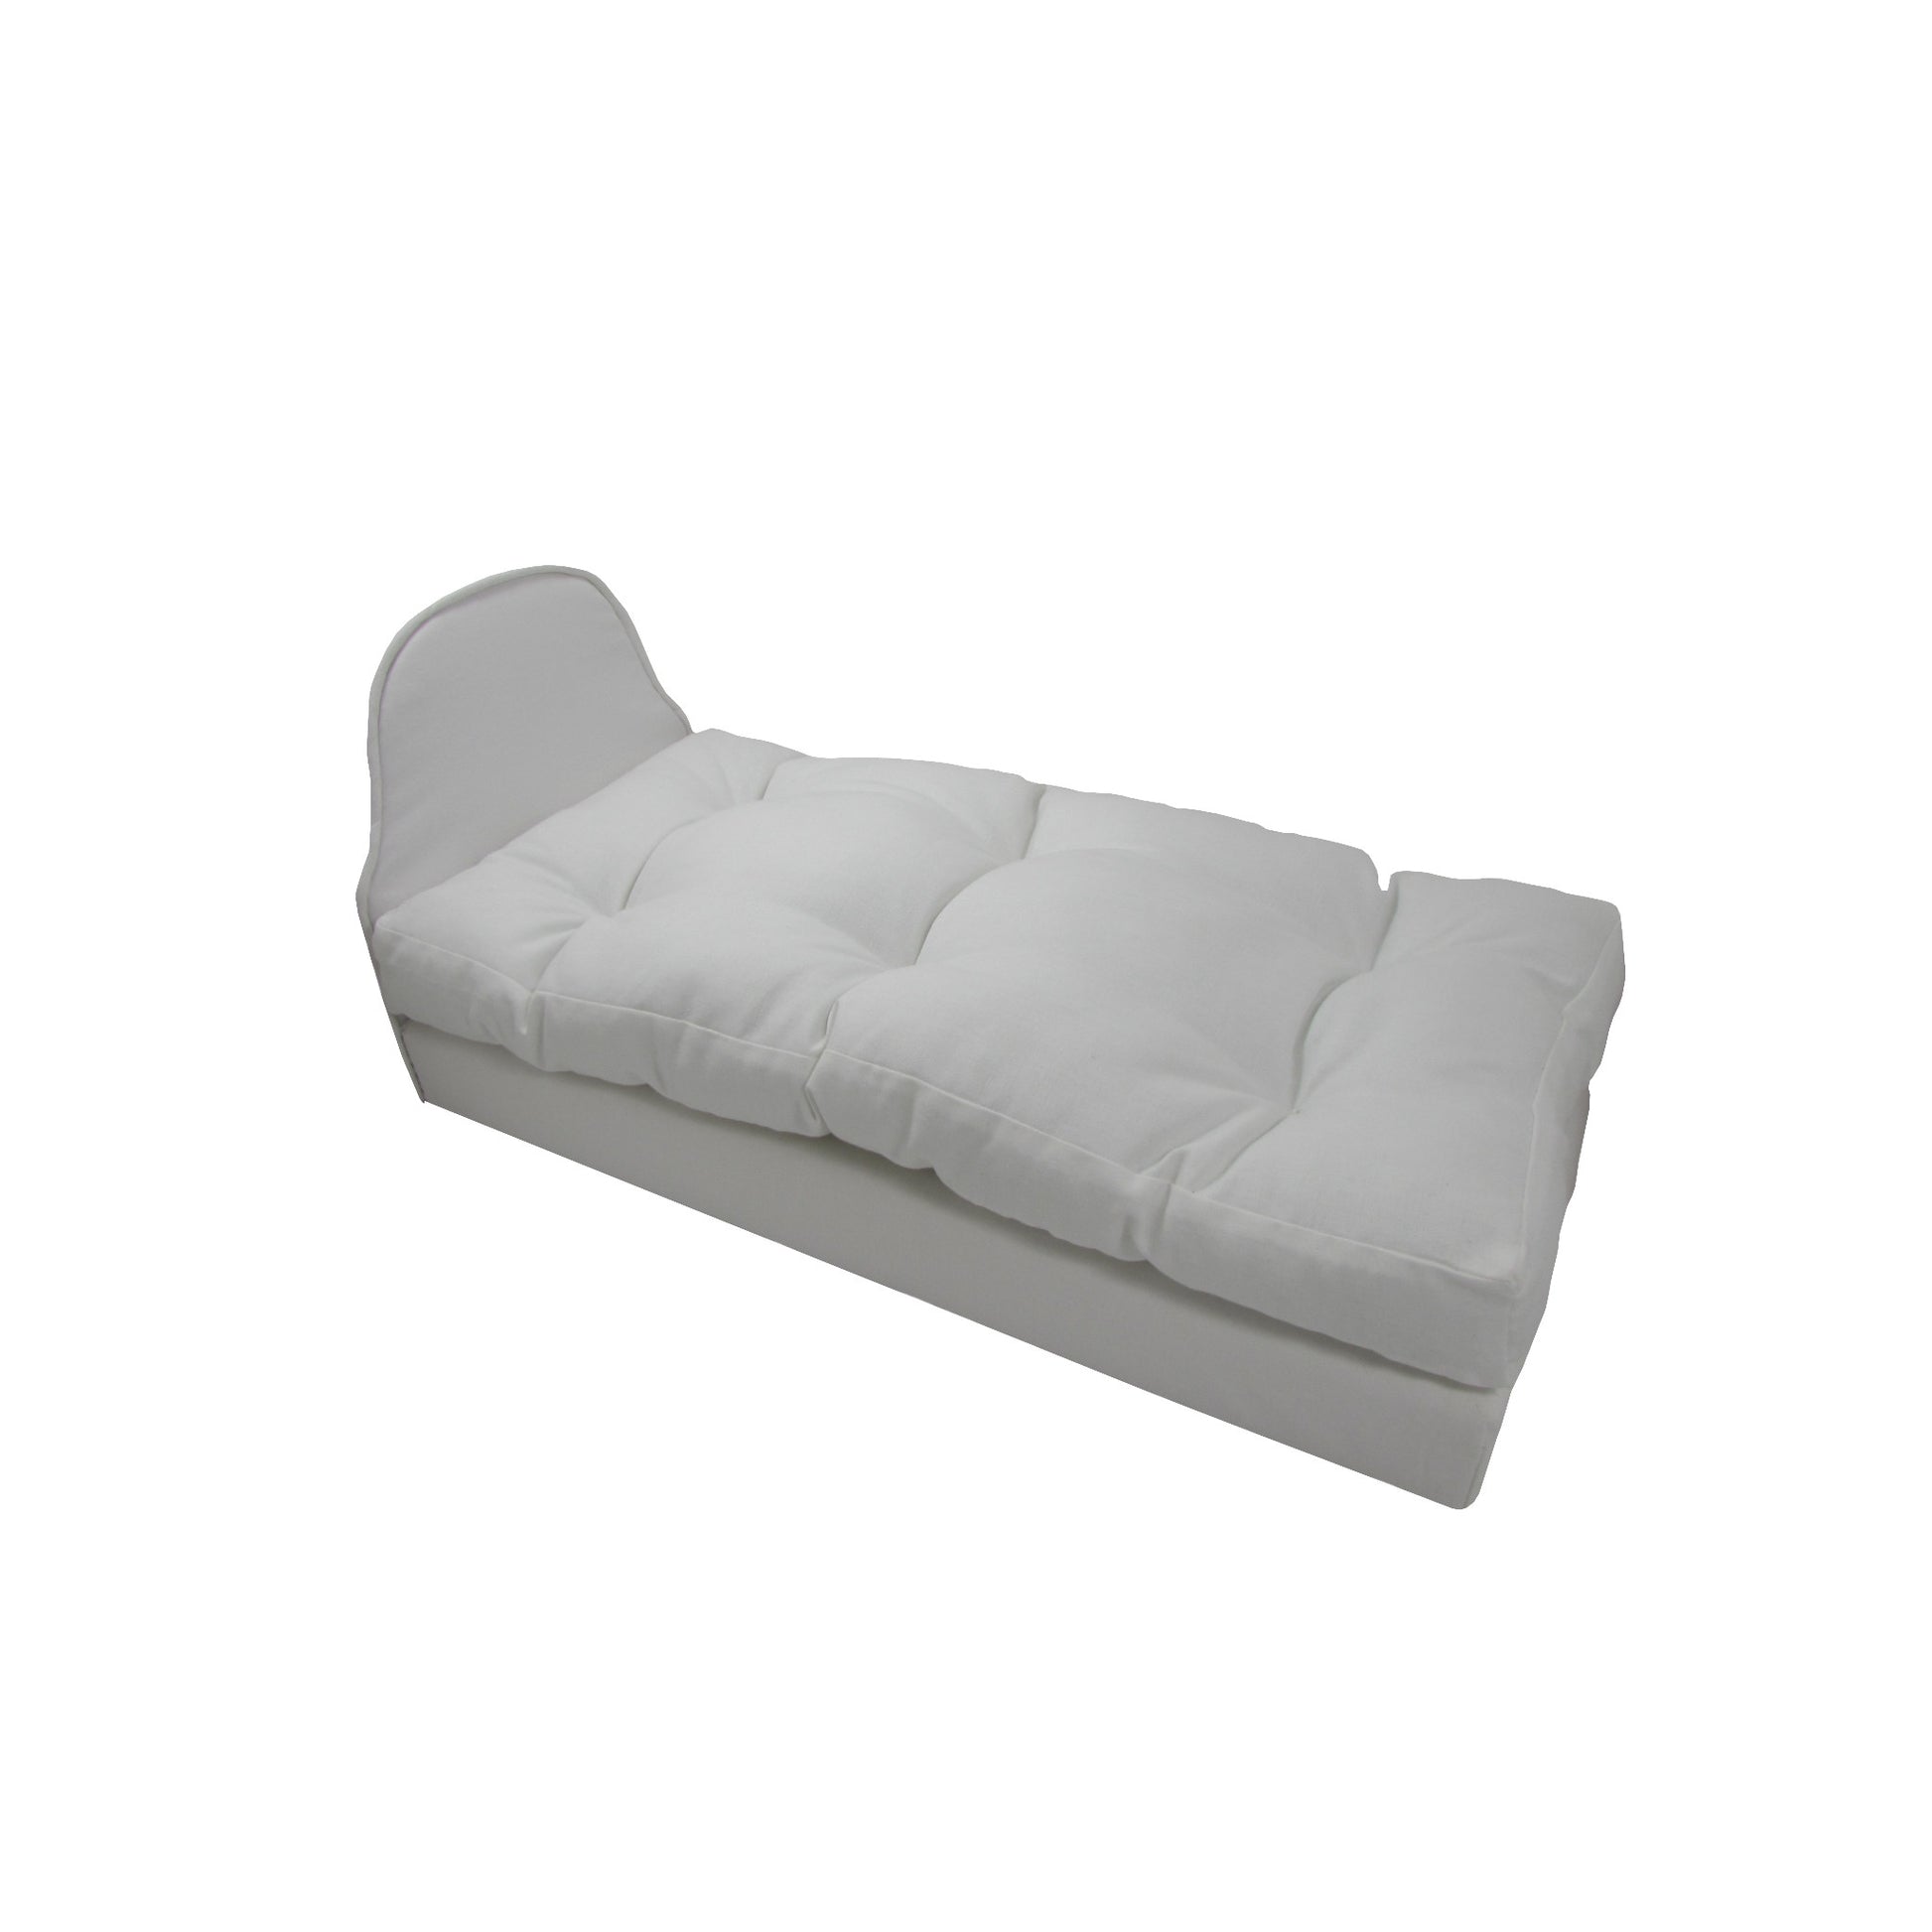 Upholstered White Doll Bed for 14.5-inch dolls